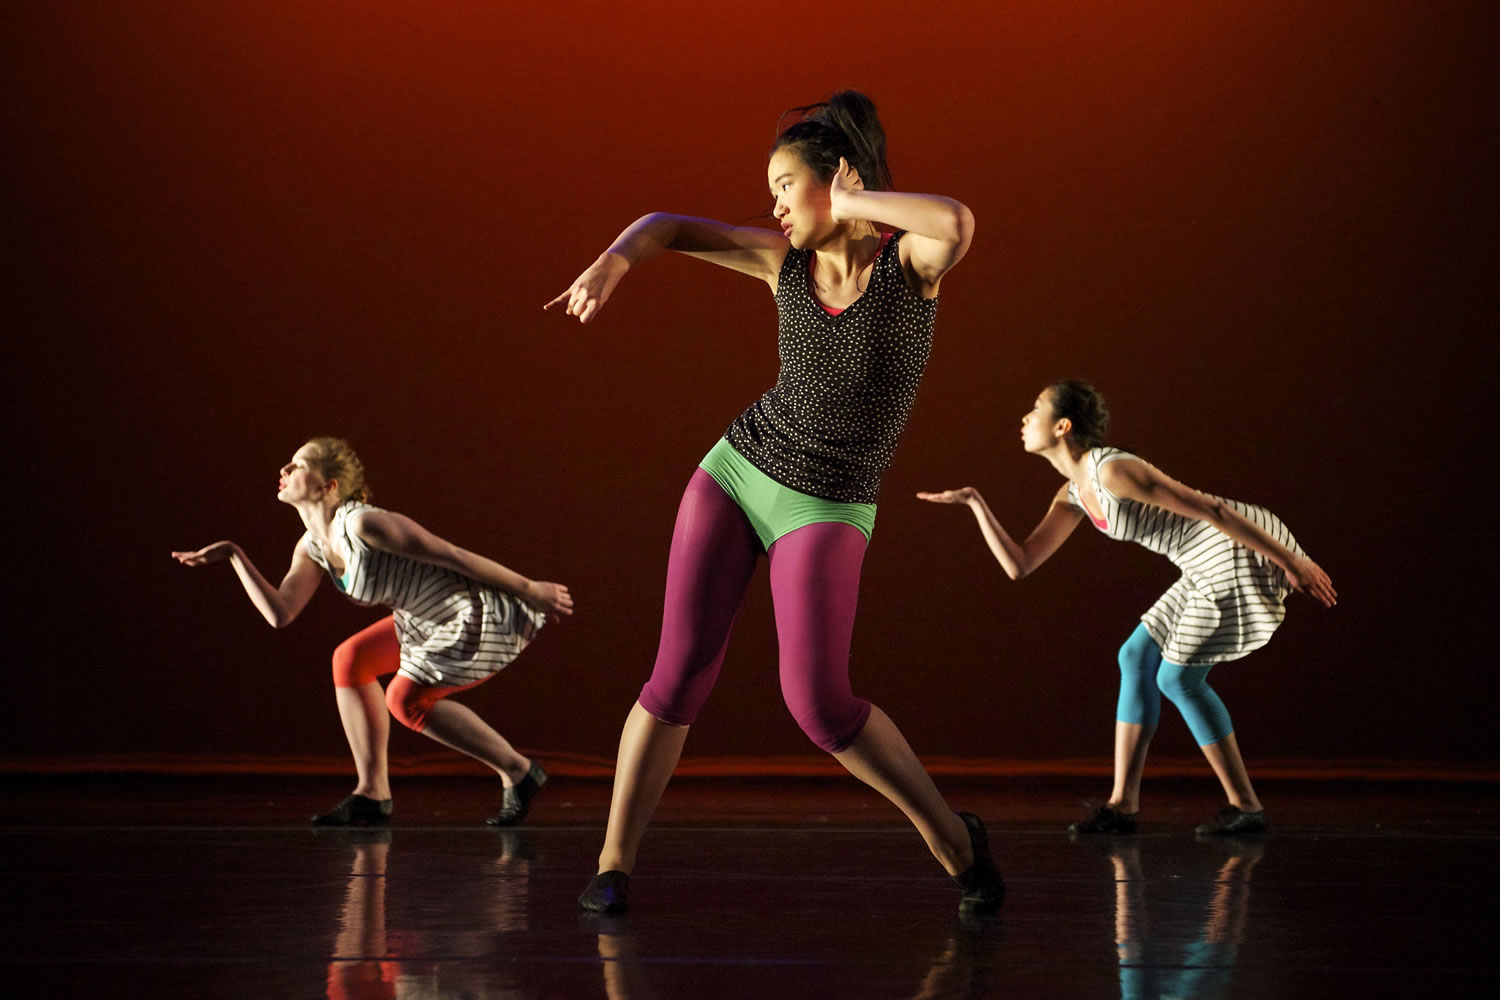 Vancouver's Columbia Dance will present its Spring Gala 2013, a performance of new works and classic ballet pieces, today and Sunday at the Royal Durst Theatre.